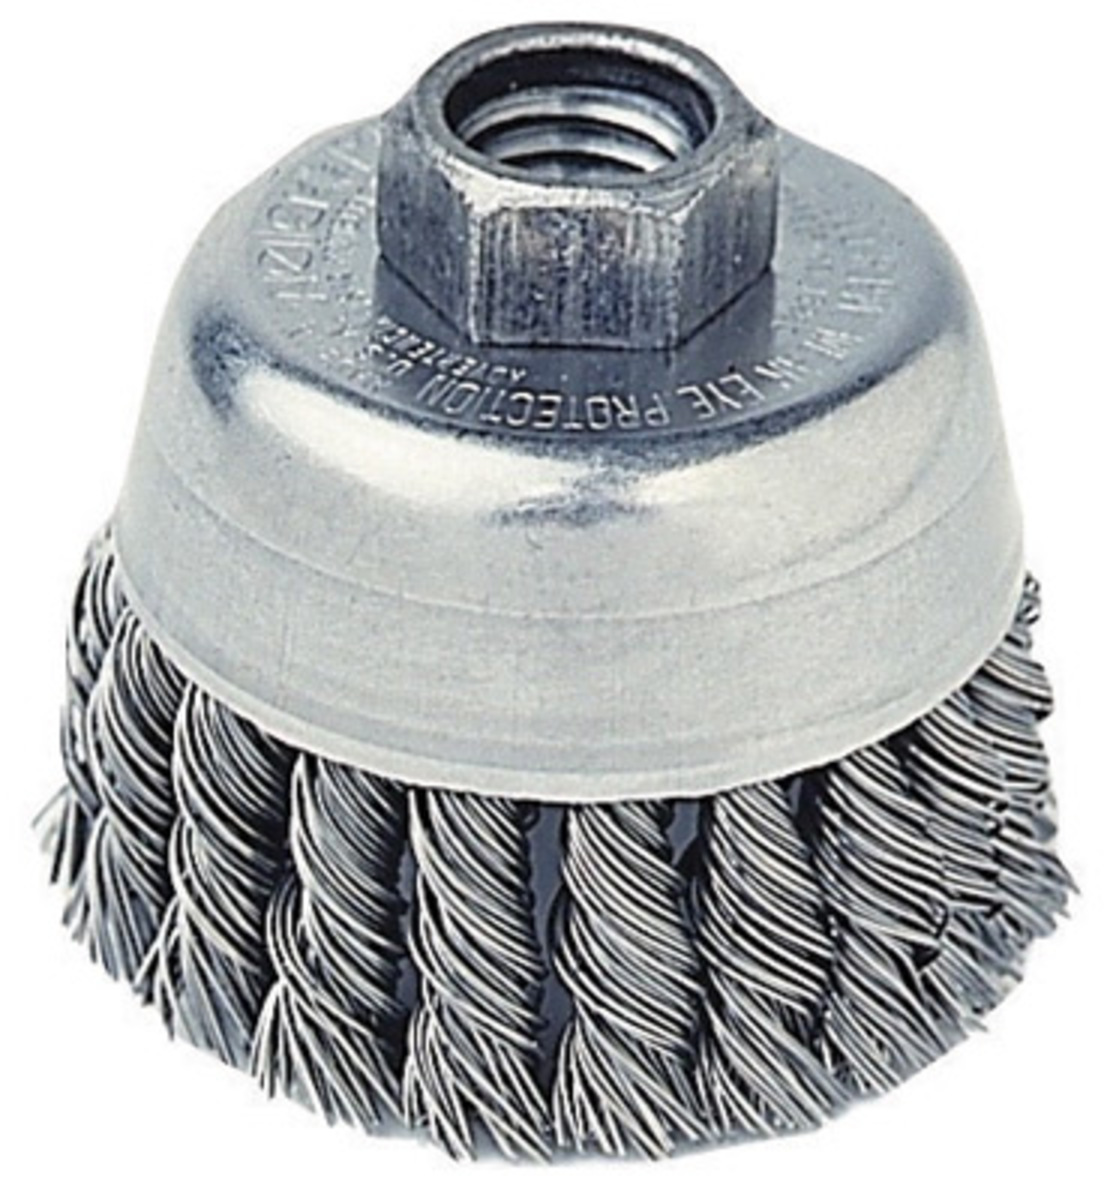 Knotted 4″ x 5/8″-11 Stainless Steel Wire Knot Cup Brush for Angle Grinders 